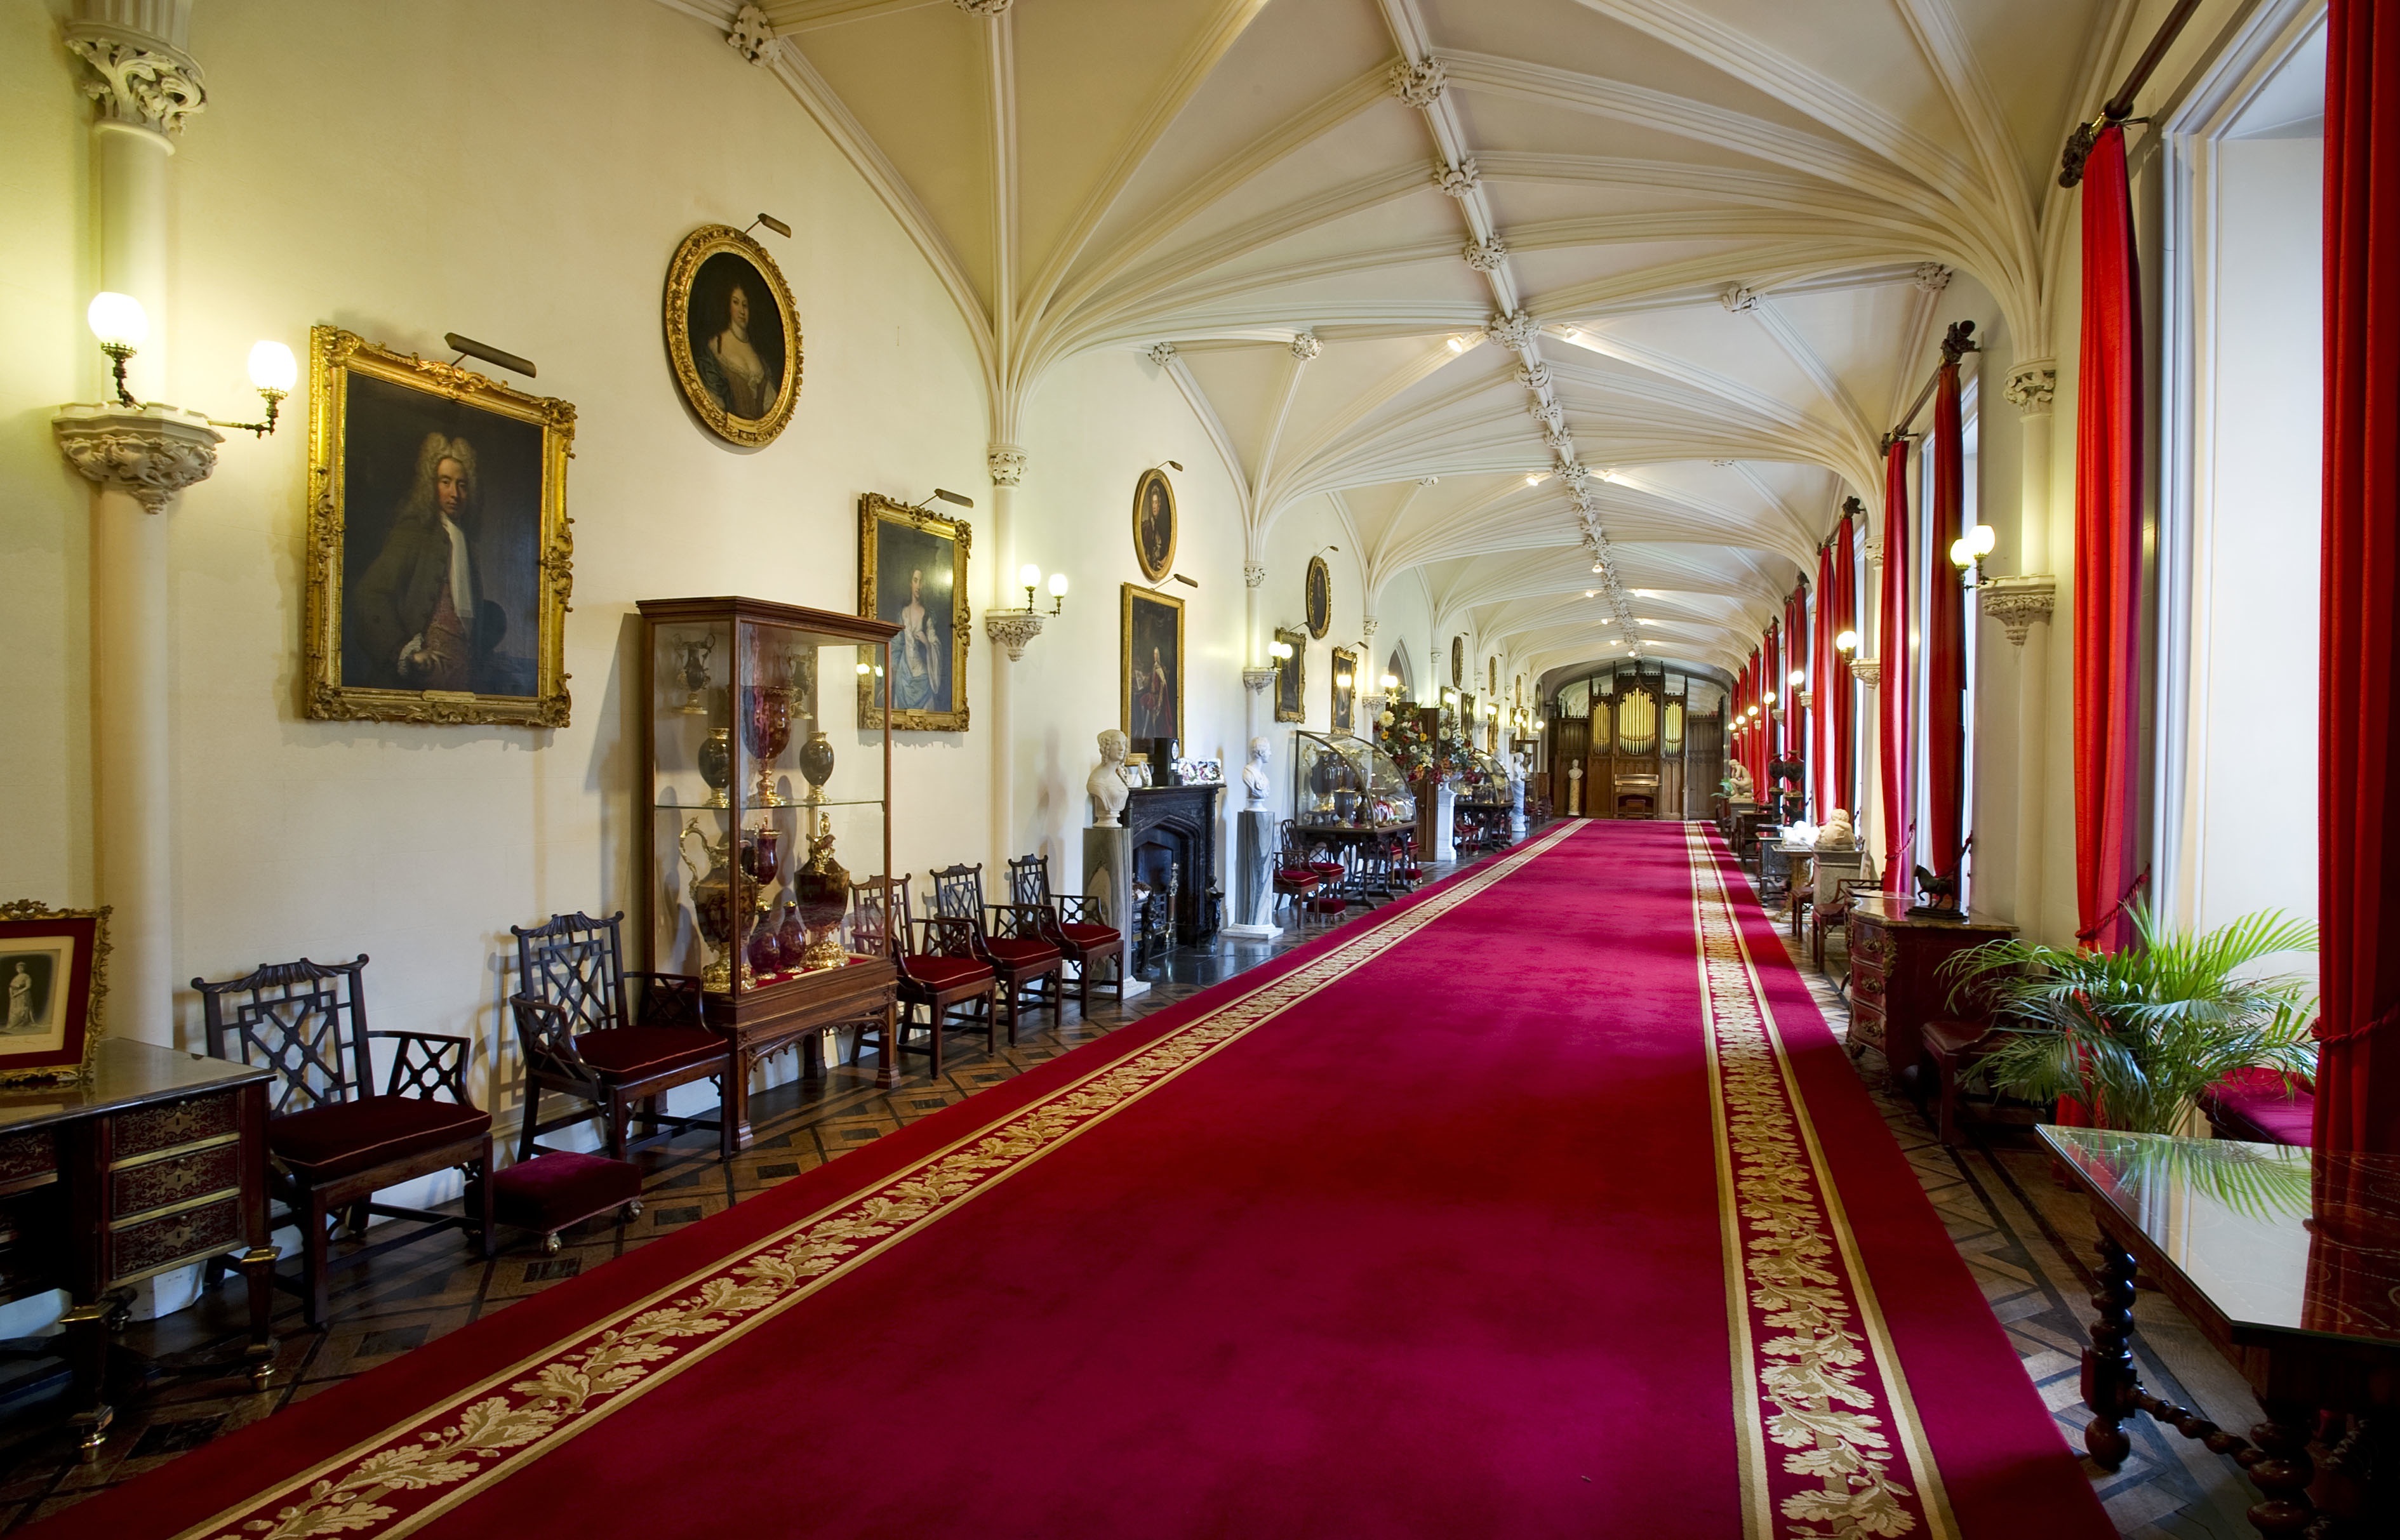 Long Gallery, Scone Palace